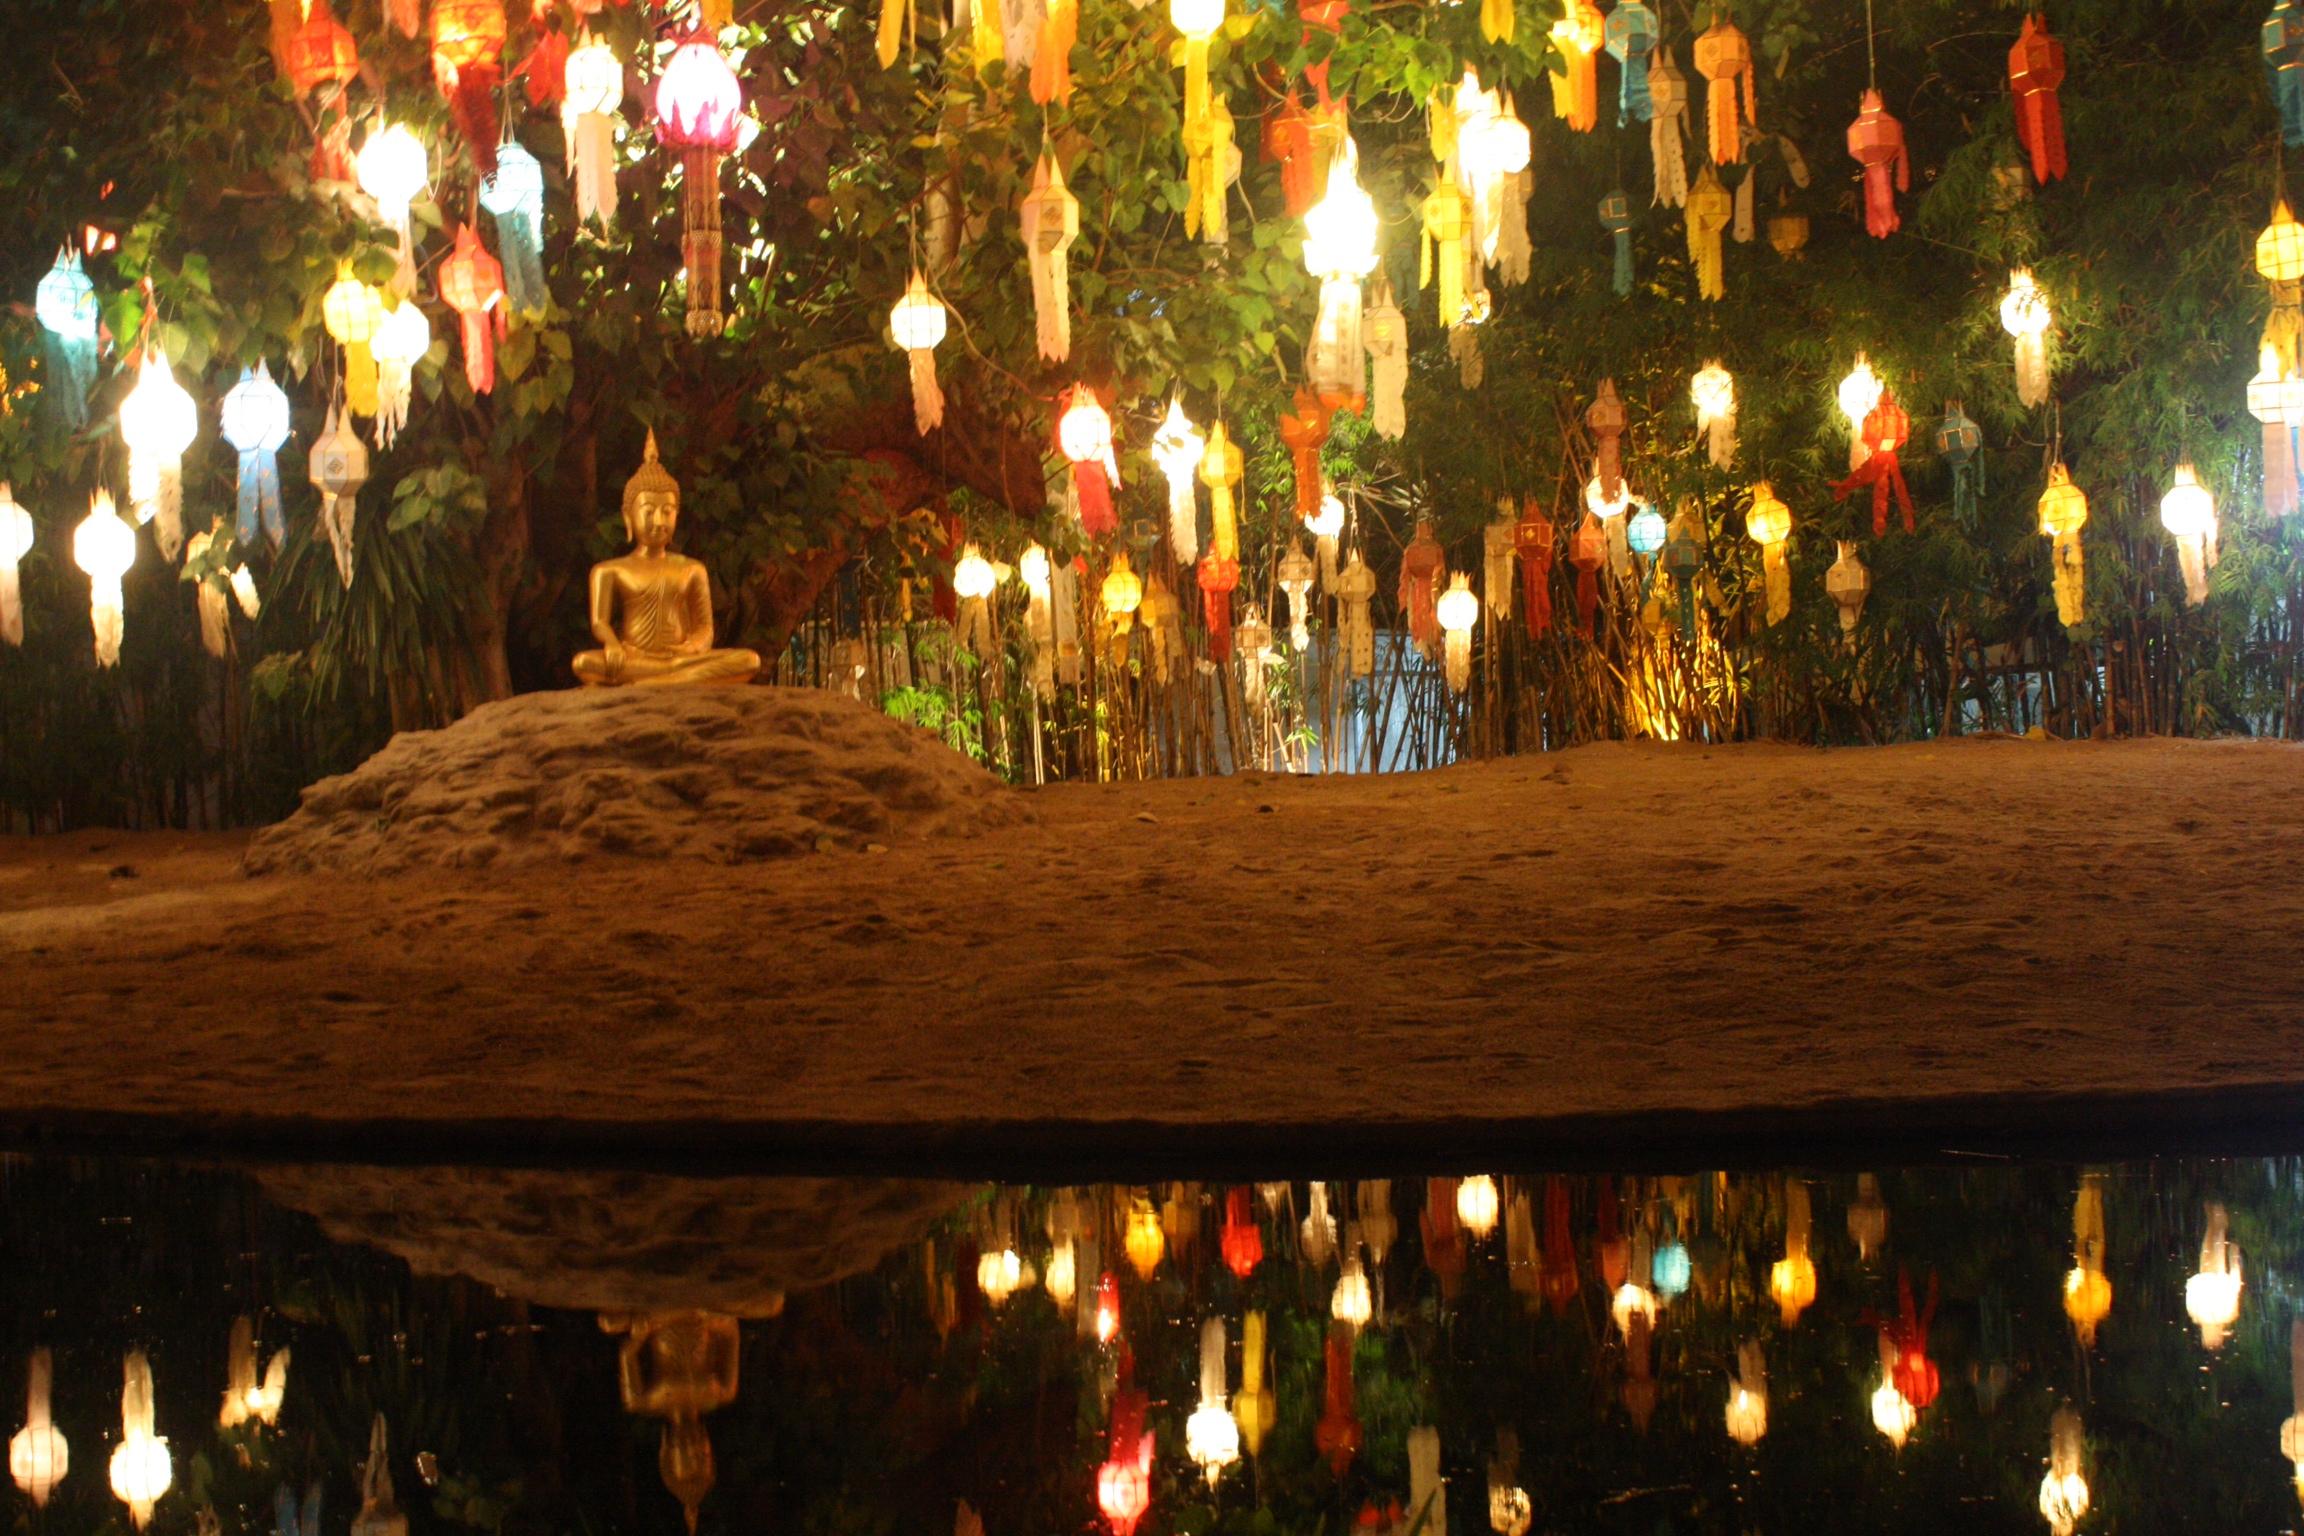 Chiang Mai Temples and Floating Lanterns